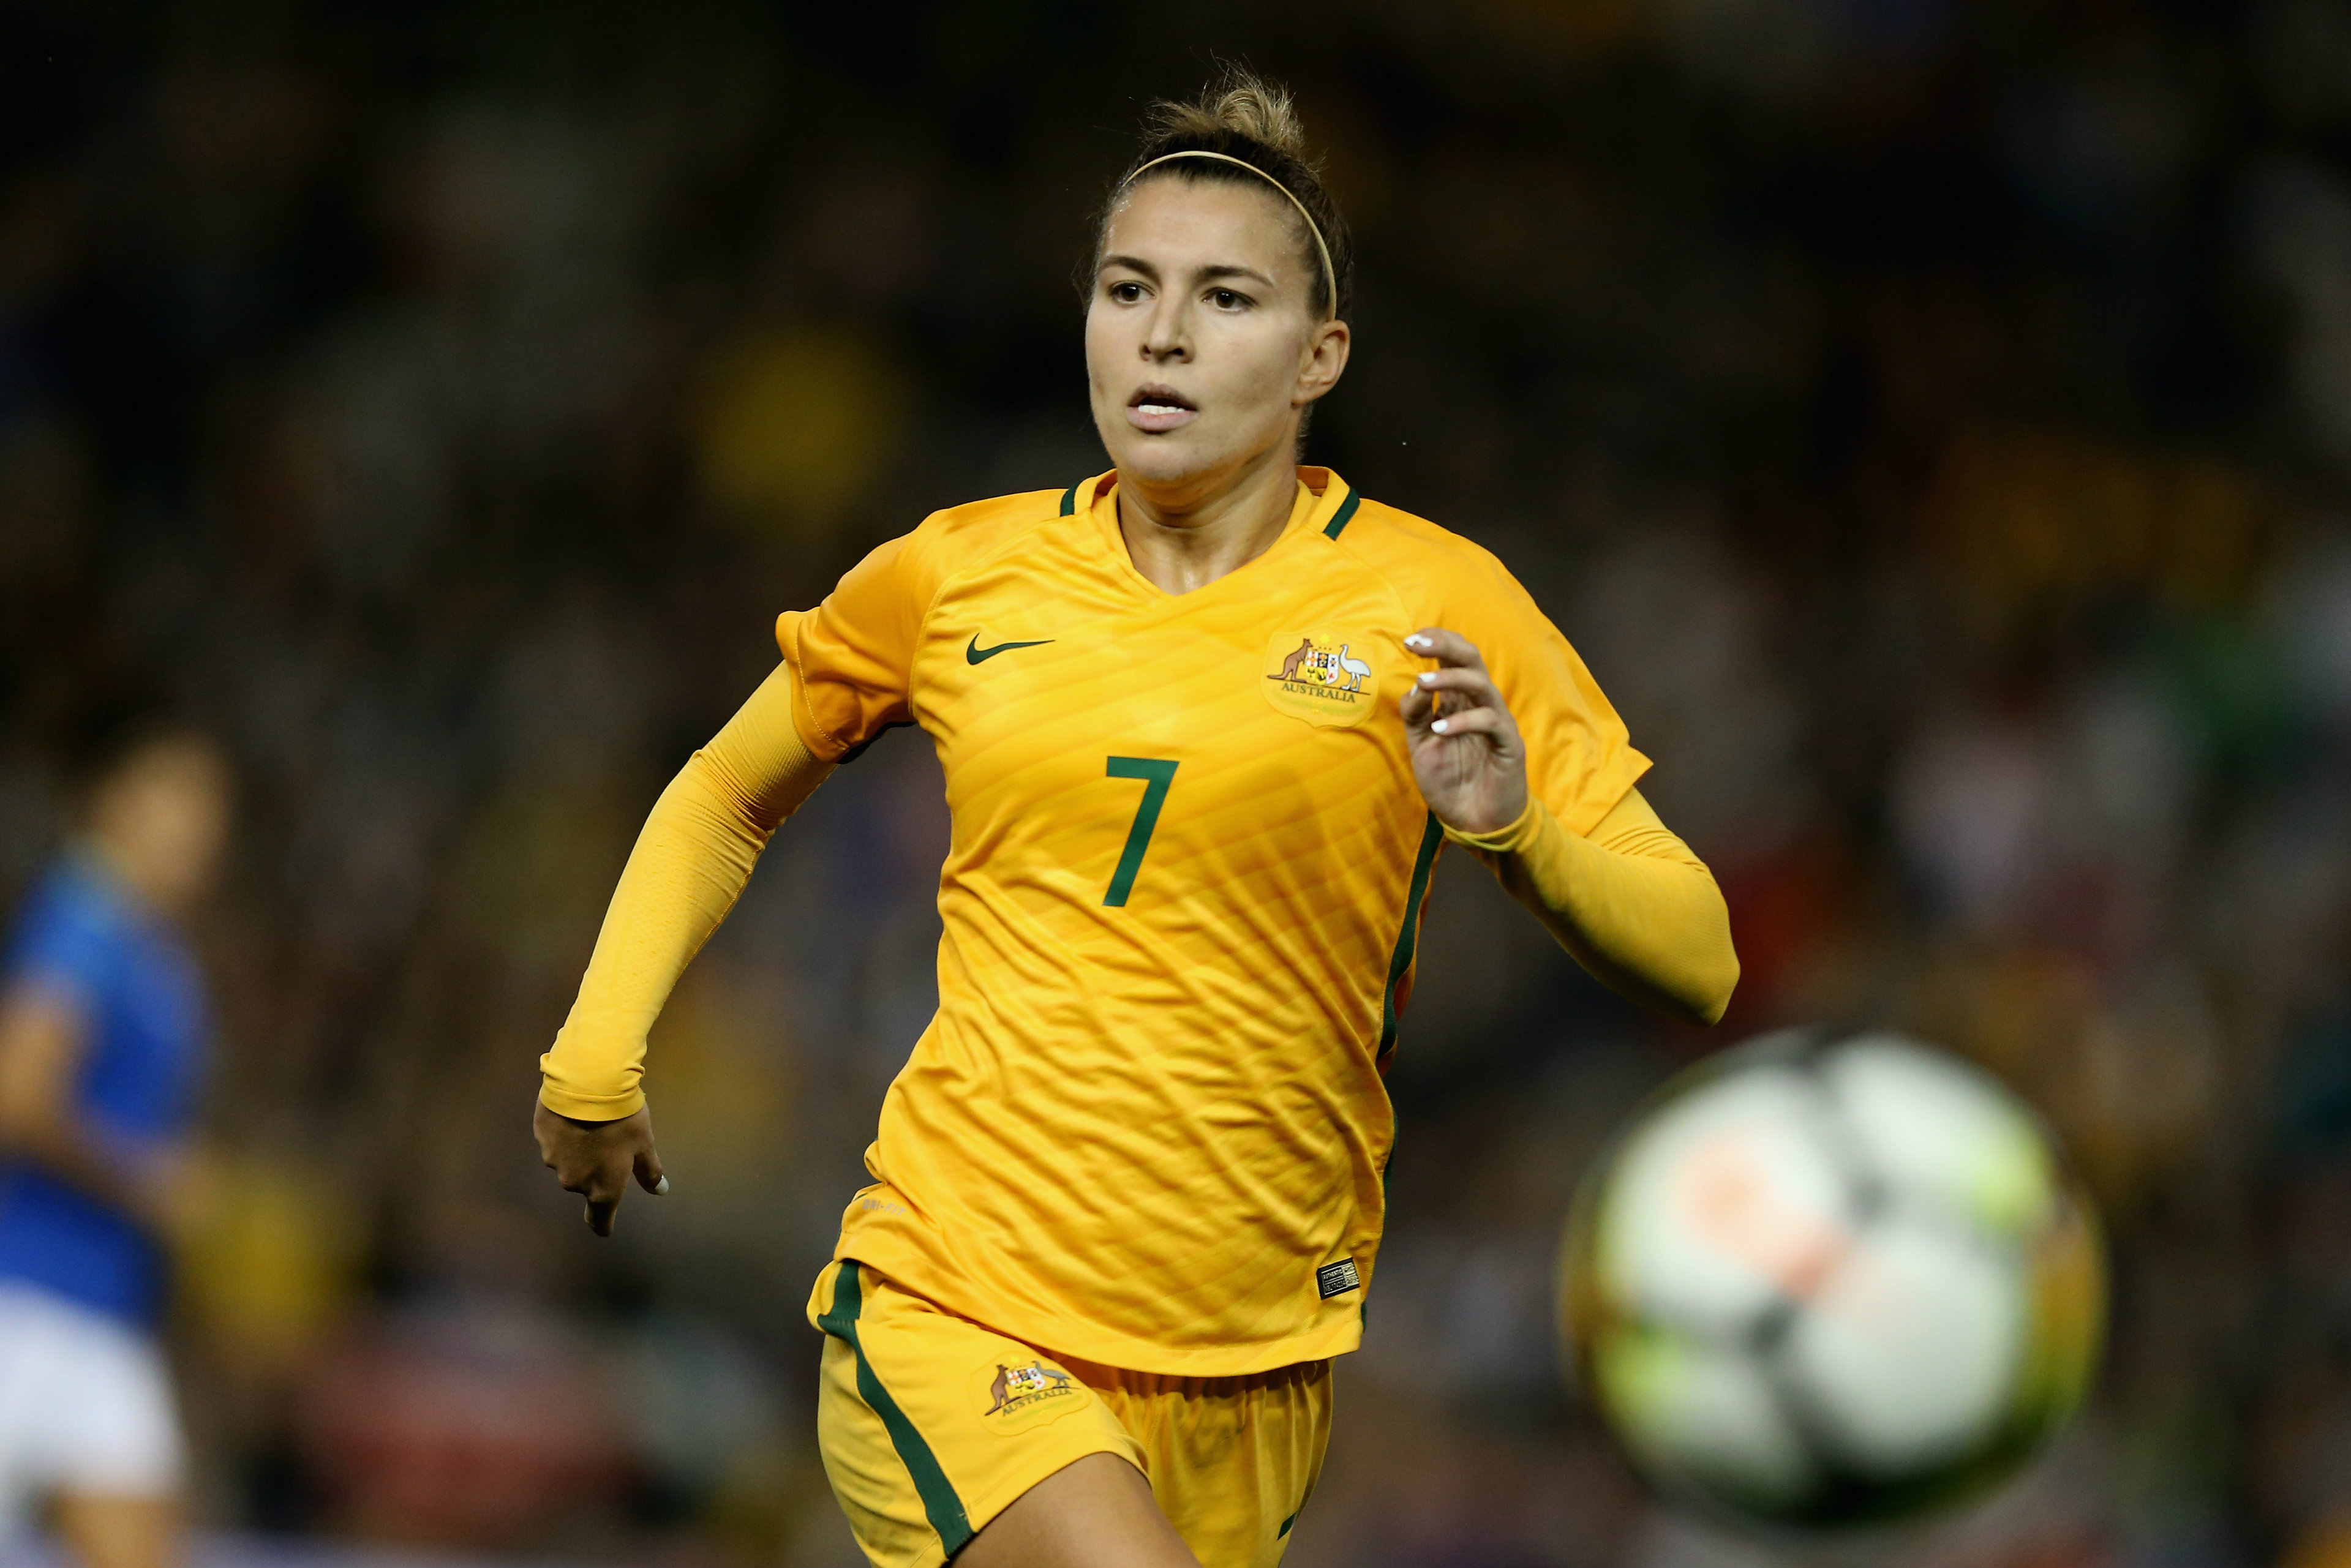 Westfield Matildas star Steph Catley has been nominated for the best defender award.